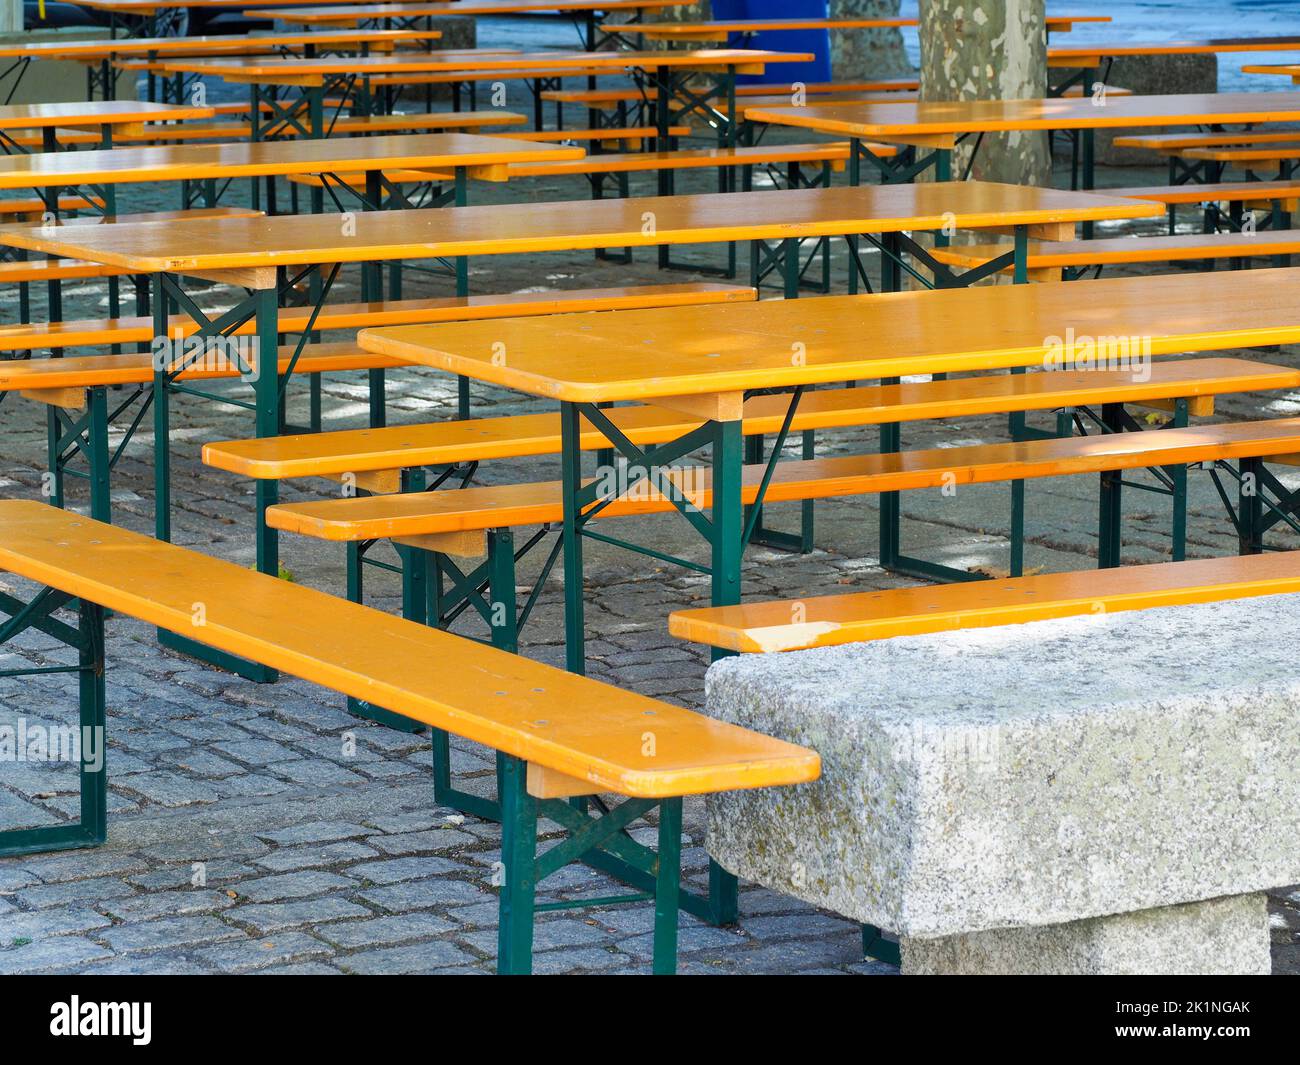 terrace of a cafe deserted due to the effects of inflation. Stock Photo